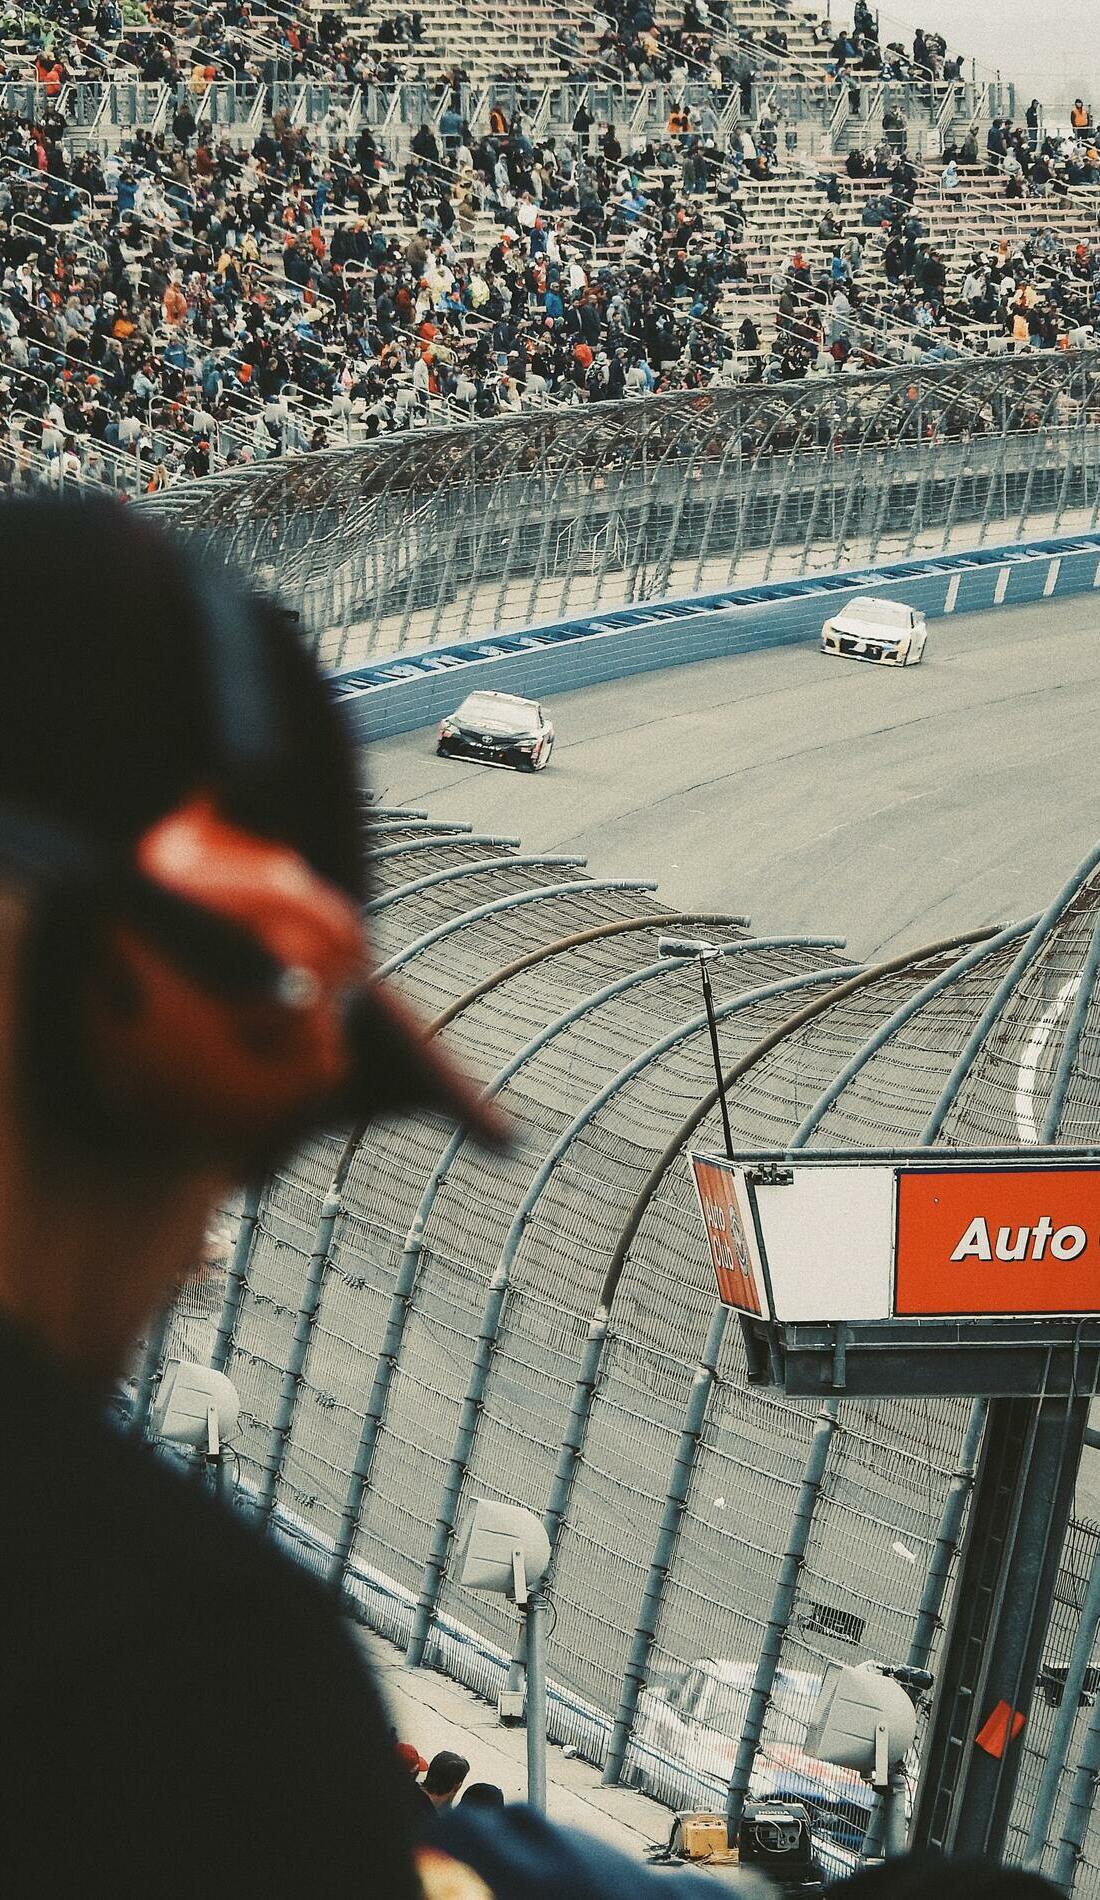 A O'Reilly Auto Parts Challenge live event